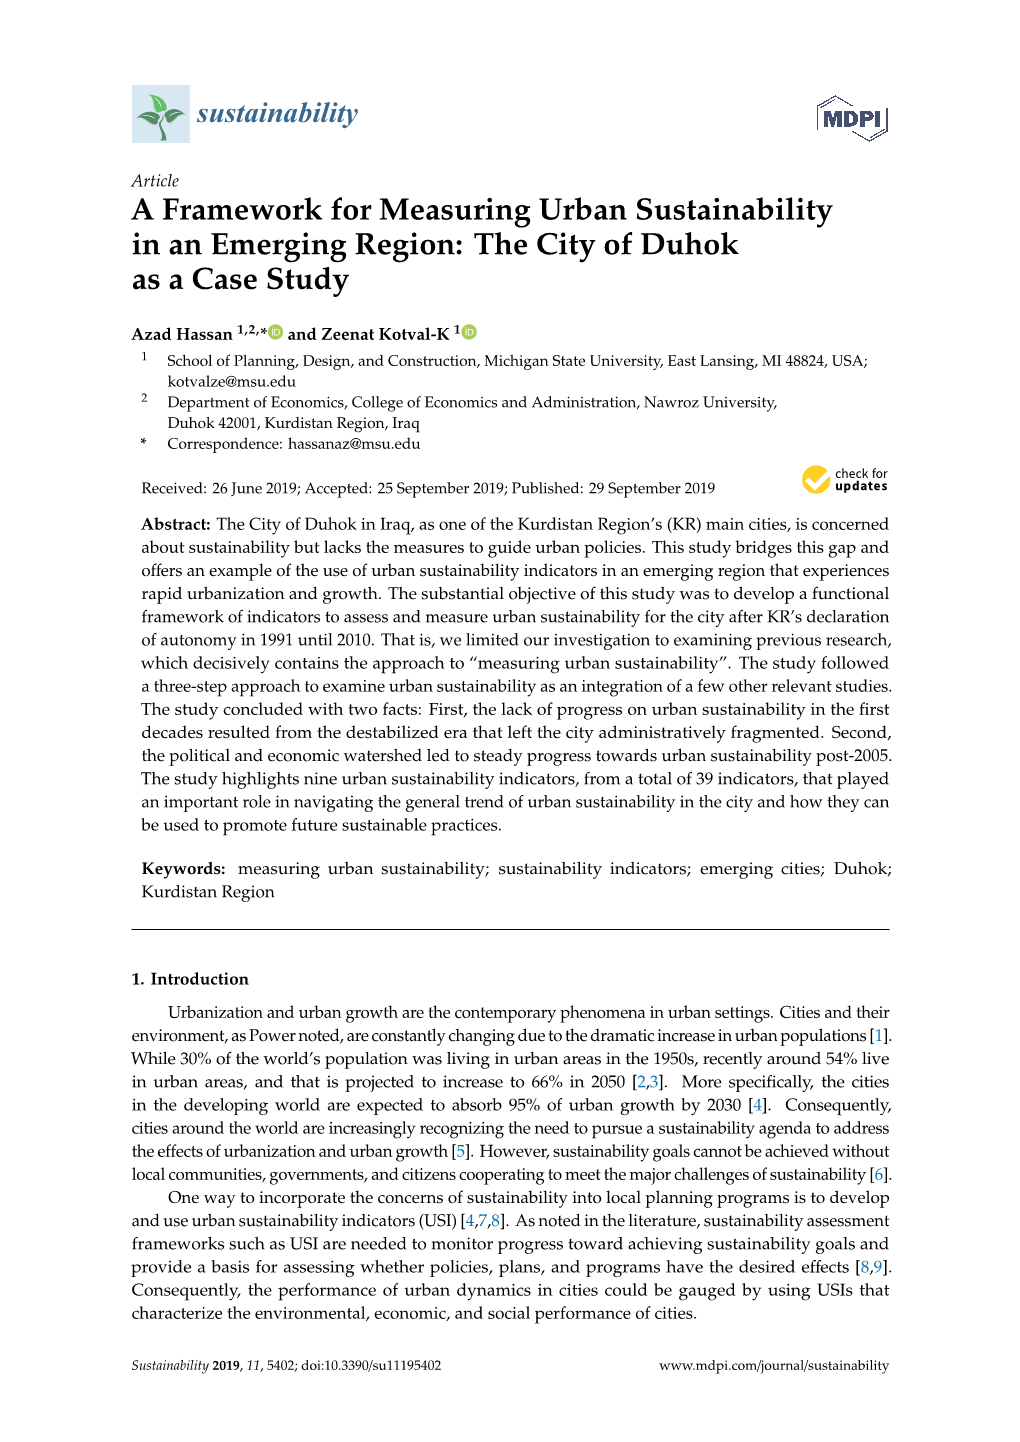 A Framework for Measuring Urban Sustainability in an Emerging Region: the City of Duhok As a Case Study